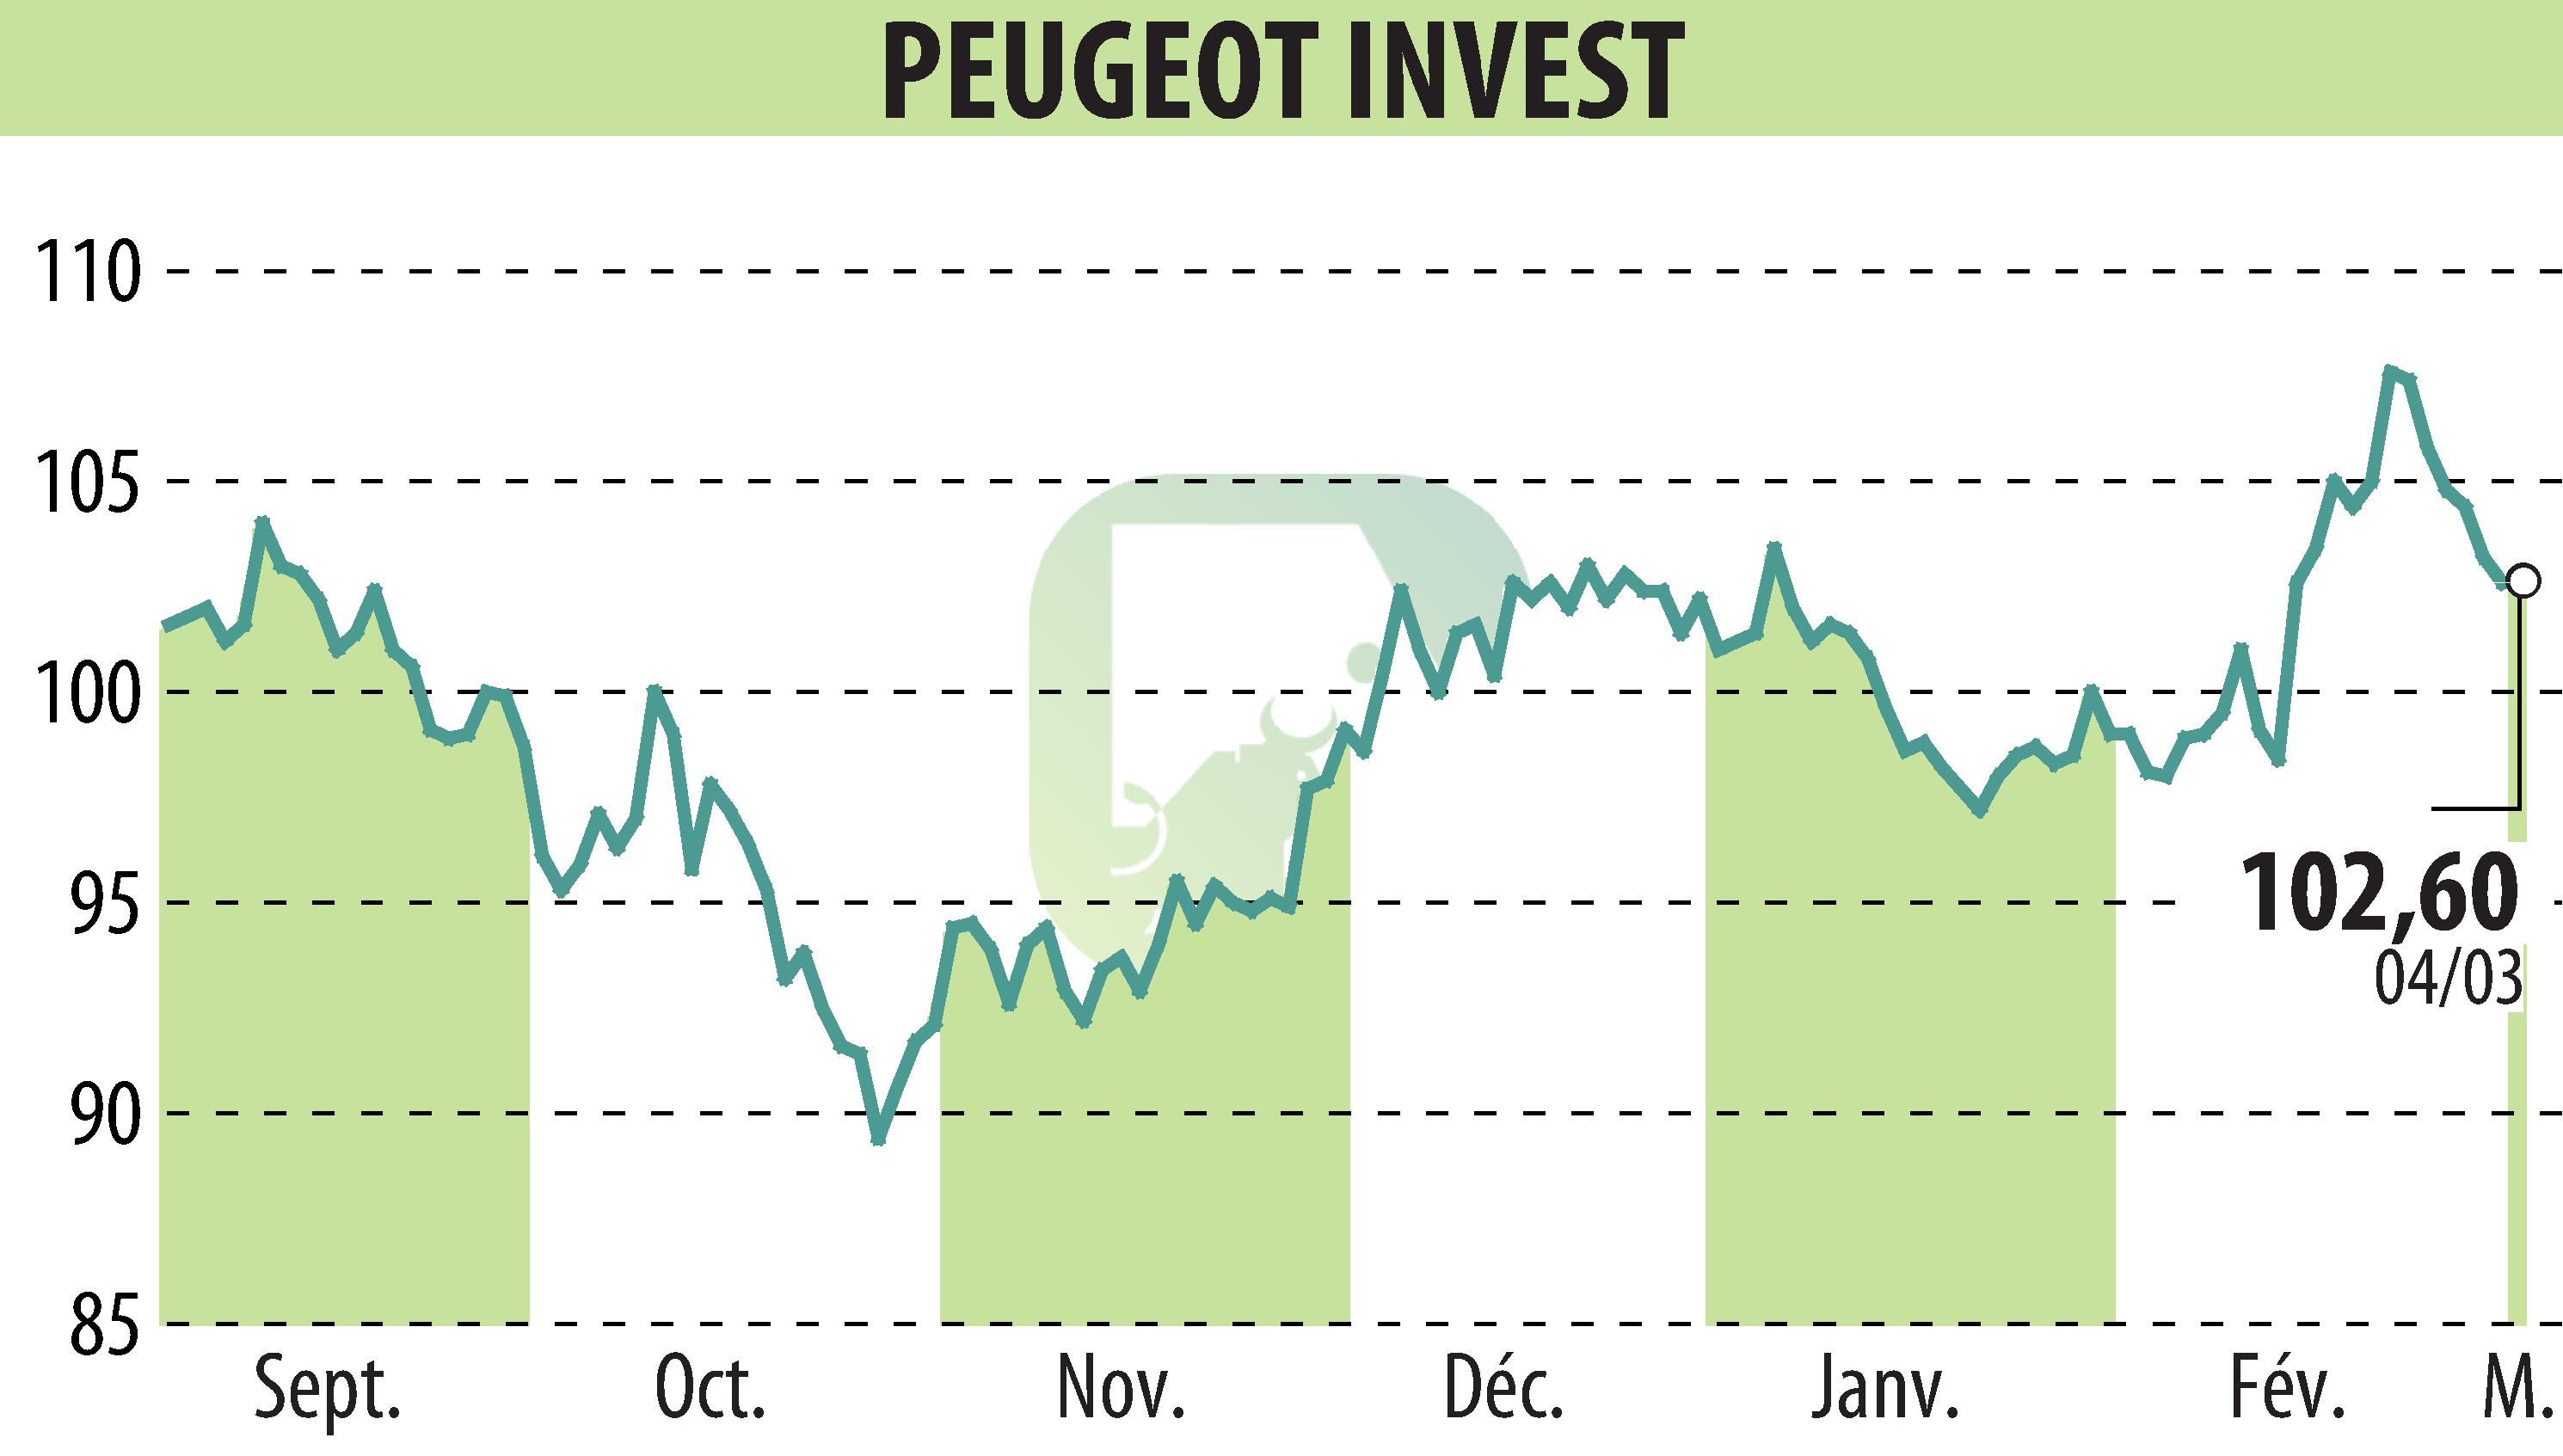 Stock price chart of Peugeot Invest (EPA:PEUG) showing fluctuations.